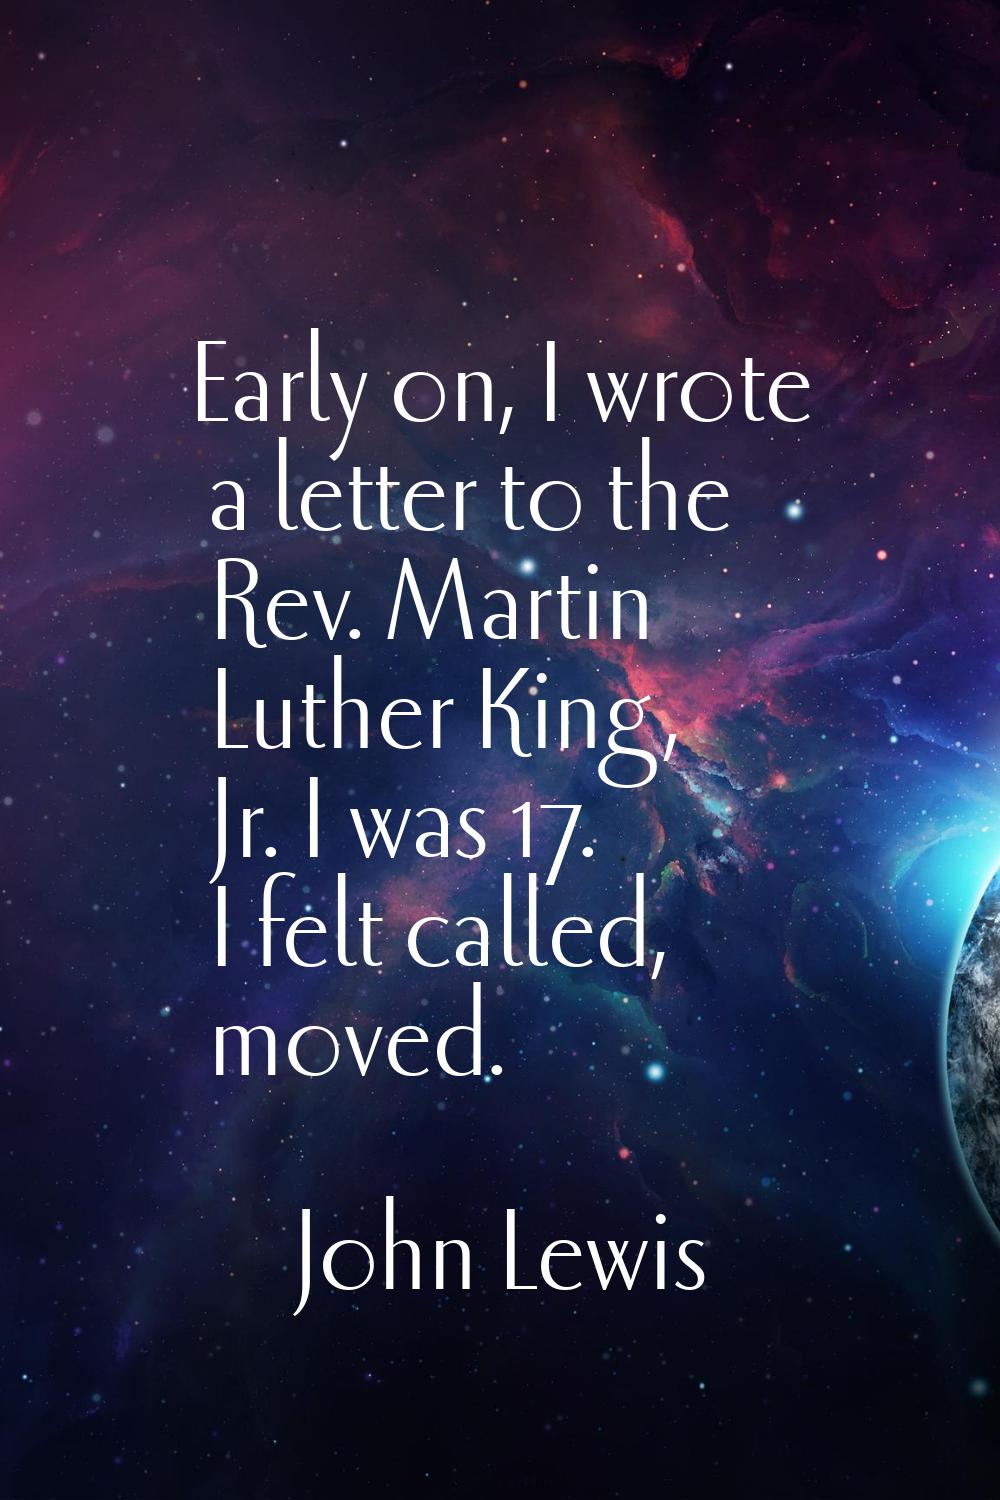 Early on, I wrote a letter to the Rev. Martin Luther King, Jr. I was 17. I felt called, moved.